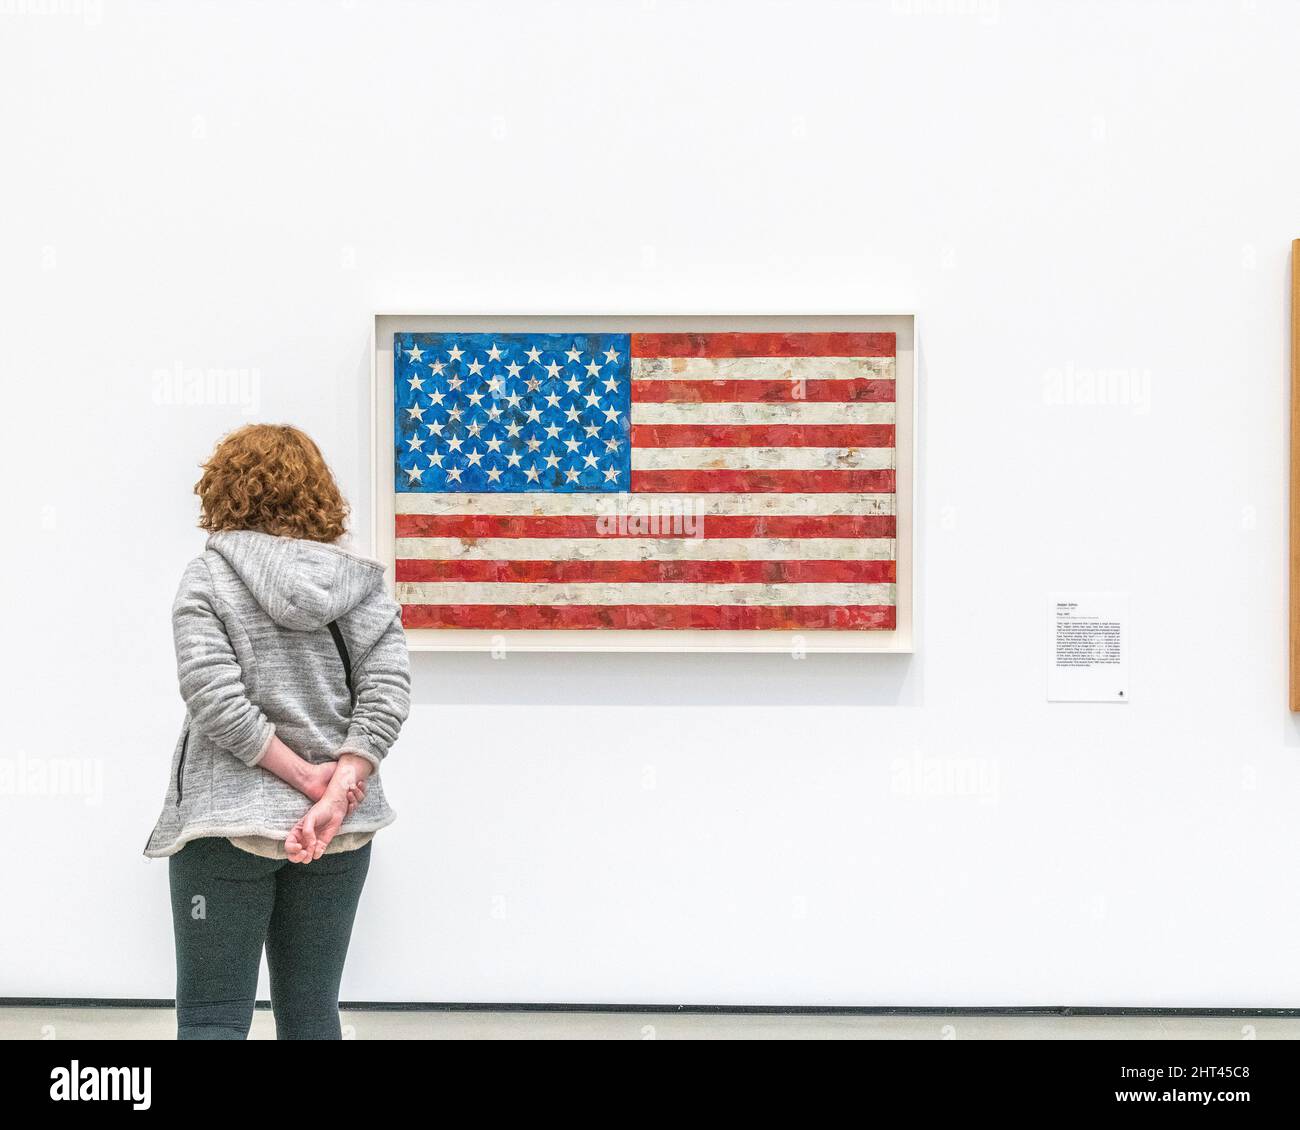 Los Angeles, CA, USA - February 25, 2022: A visitor views the painting “Flag” by artist Jasper Johns at the Broad Museum in downtown Los Angeles, CA. Stock Photo